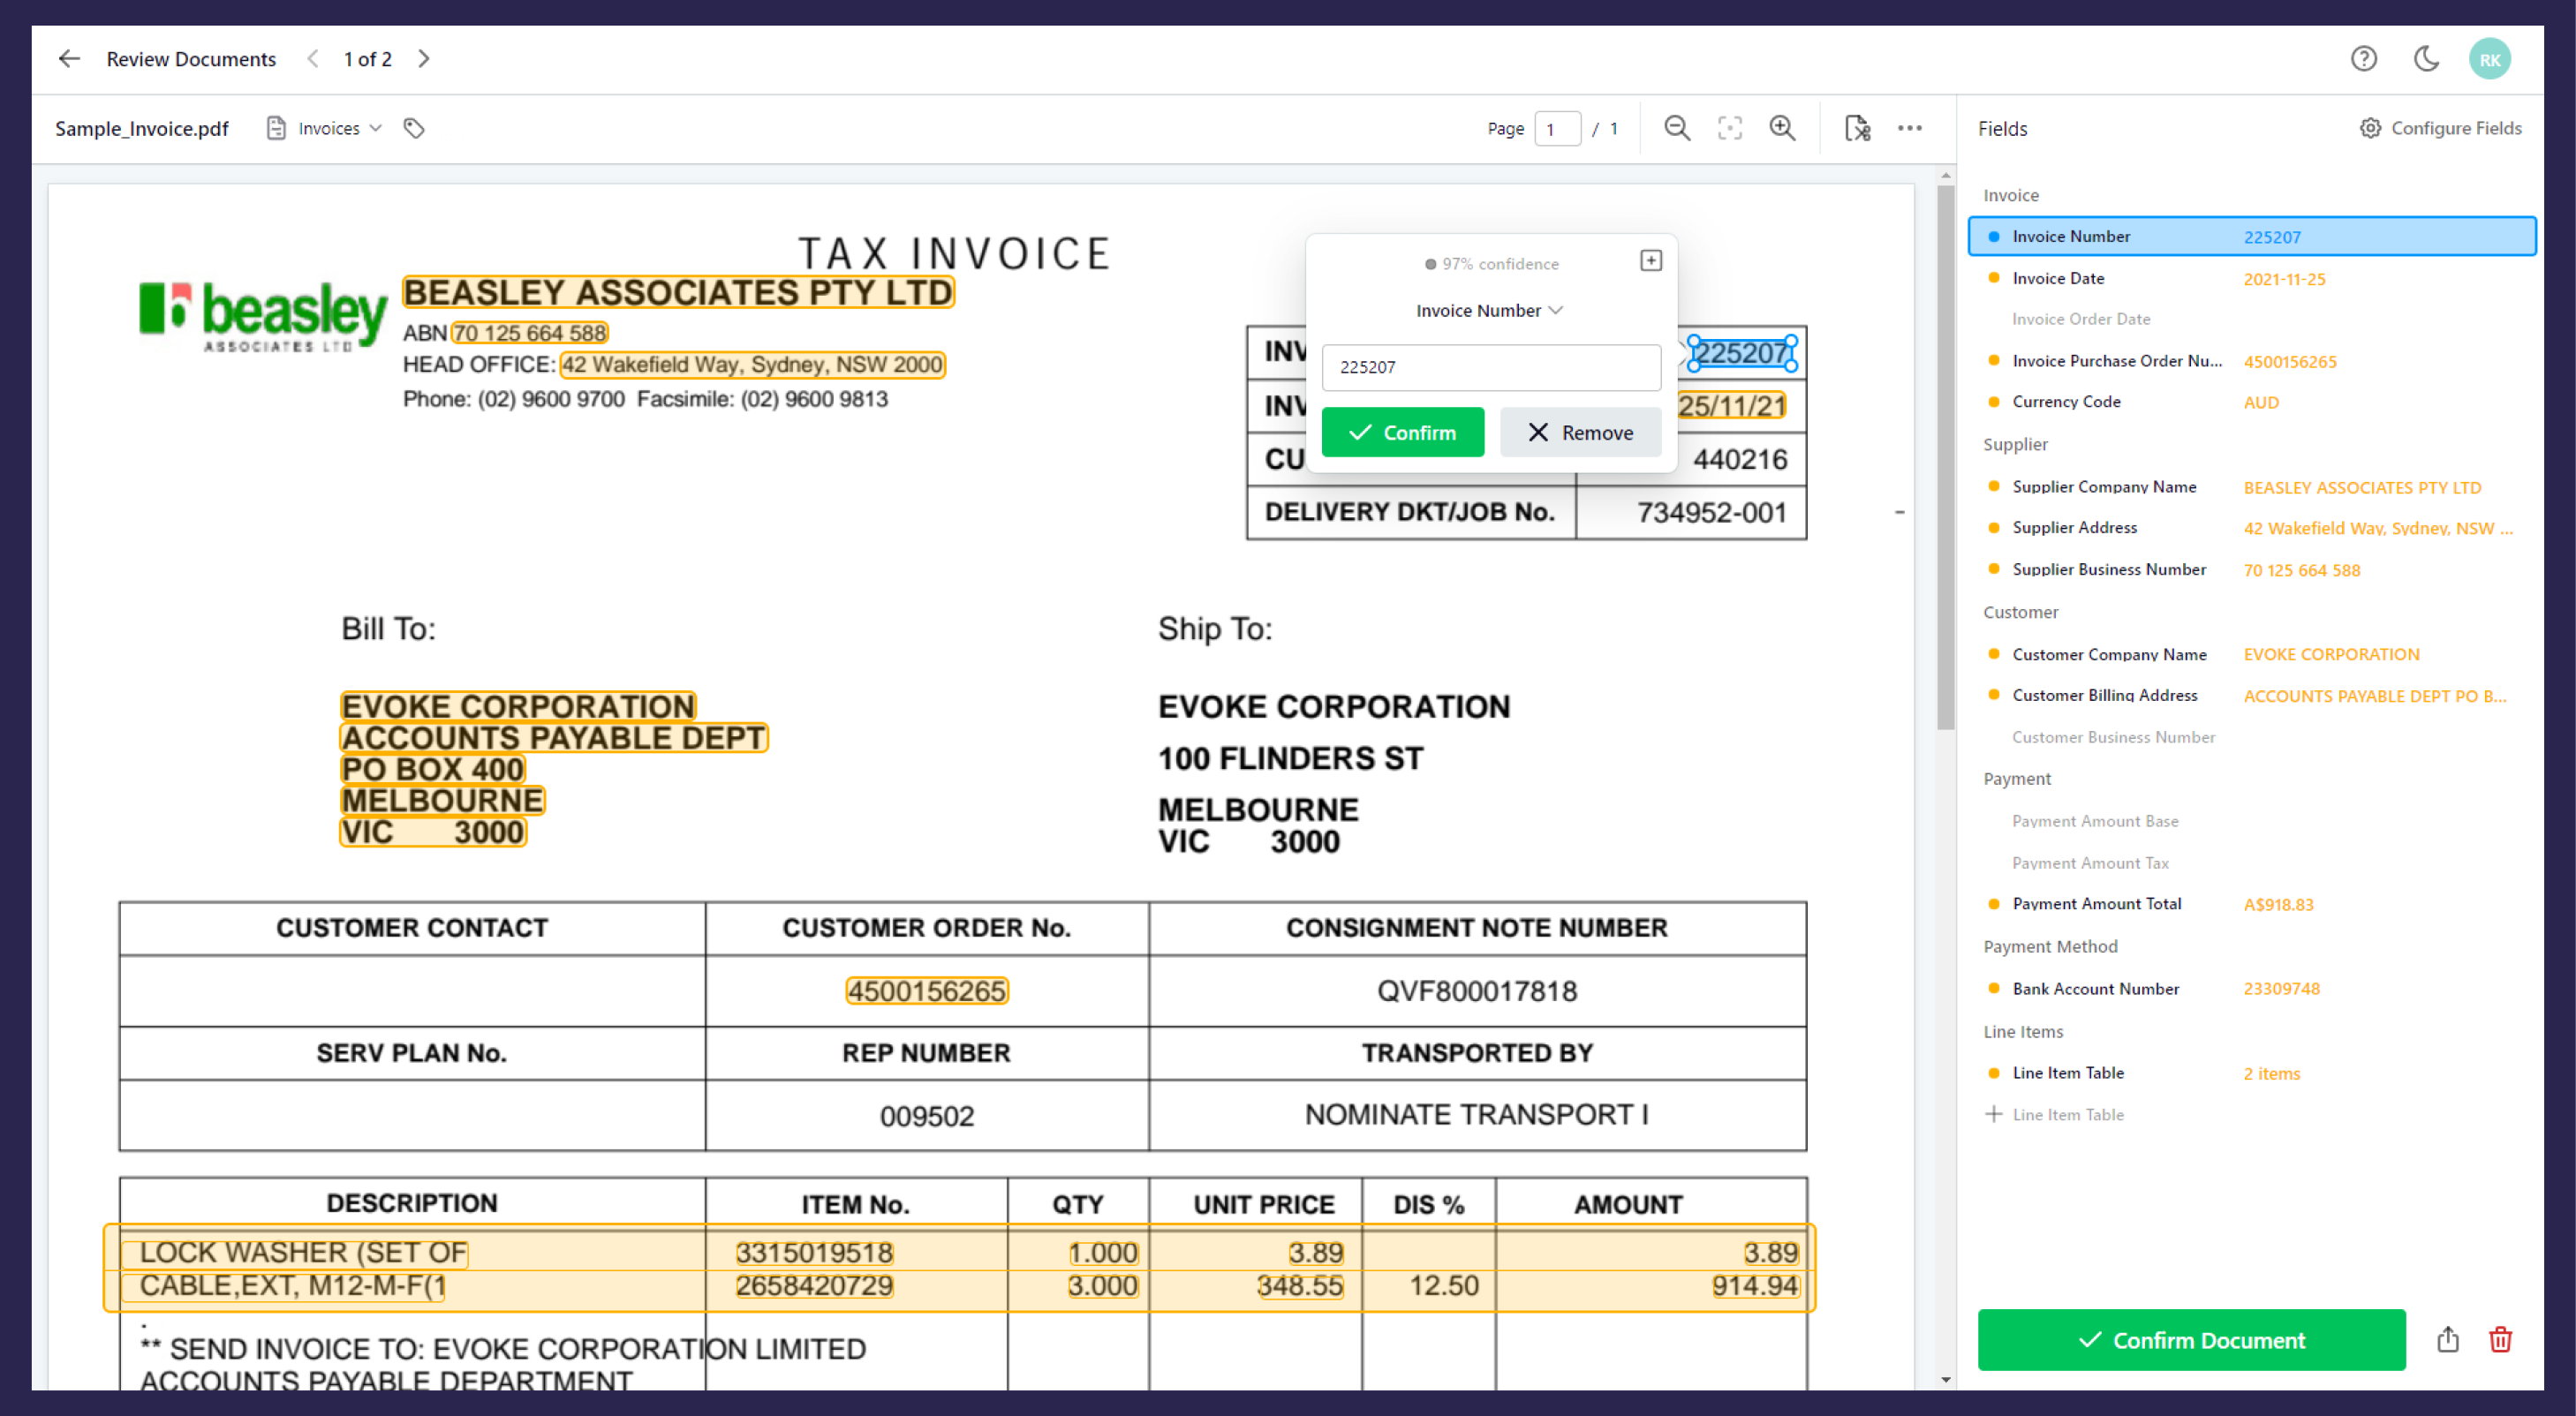 Invoice Extractor review documents